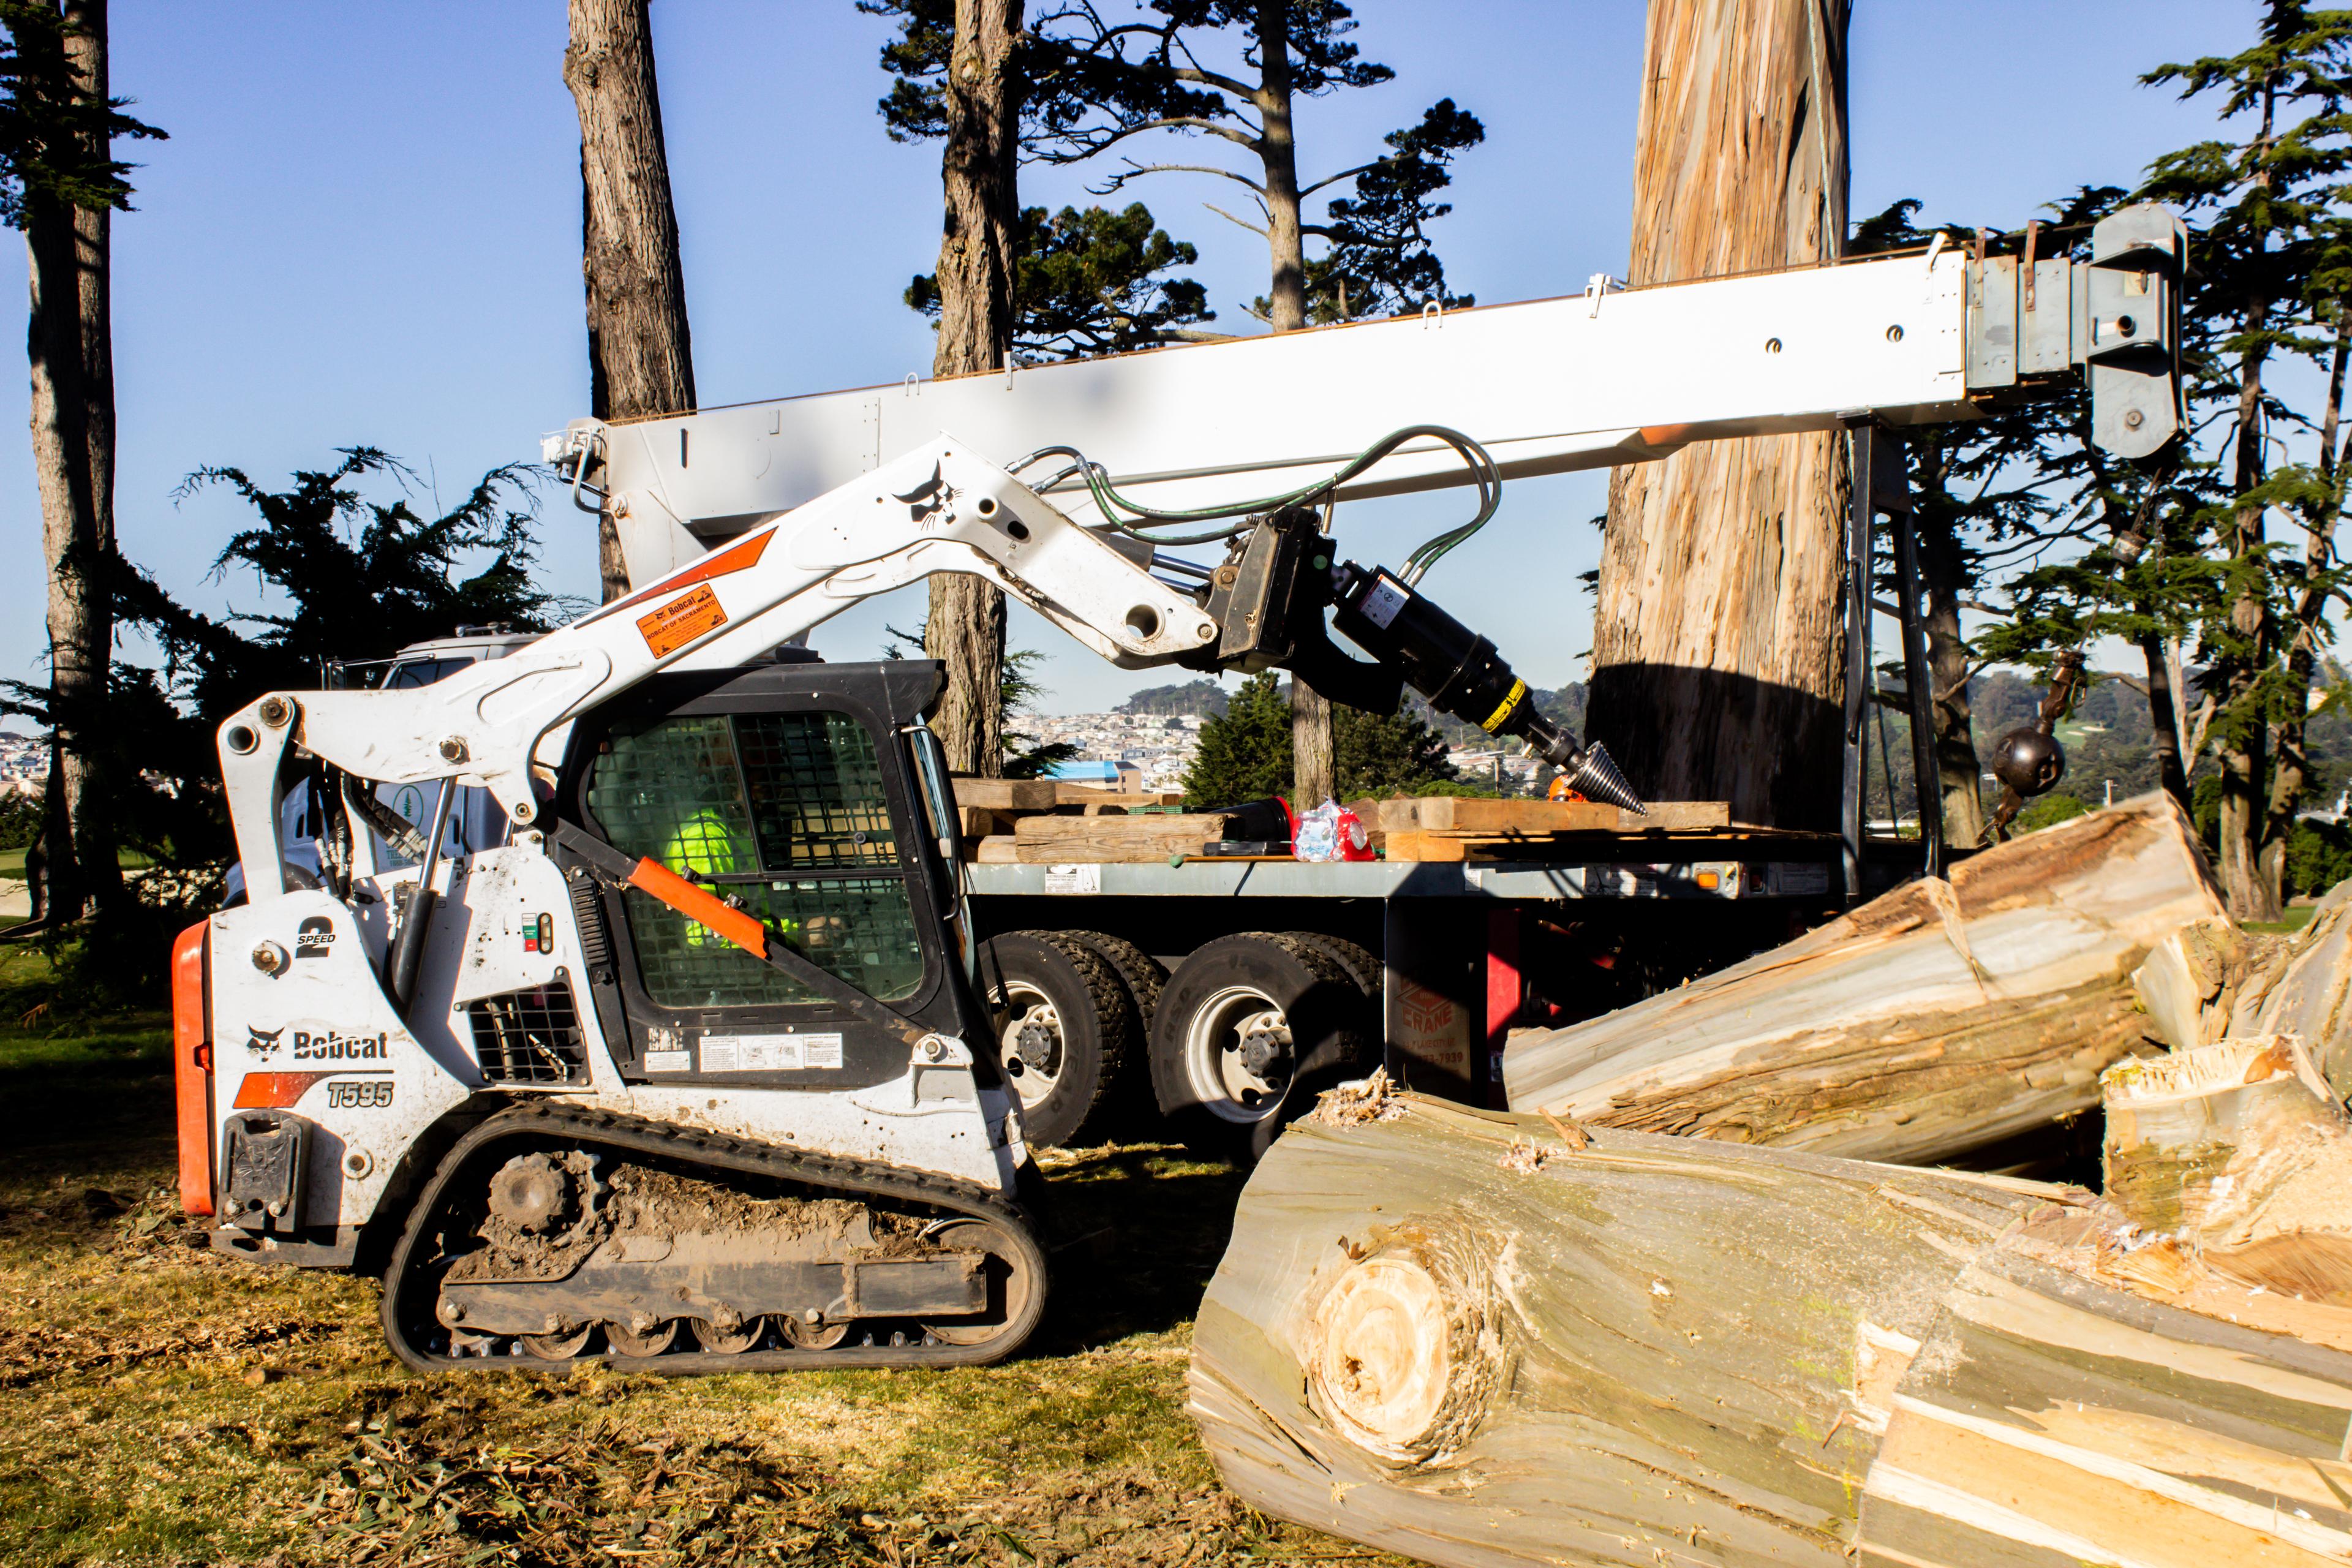 Picture of OneSource Tree Service Inc. - OneSource Tree Service Inc.